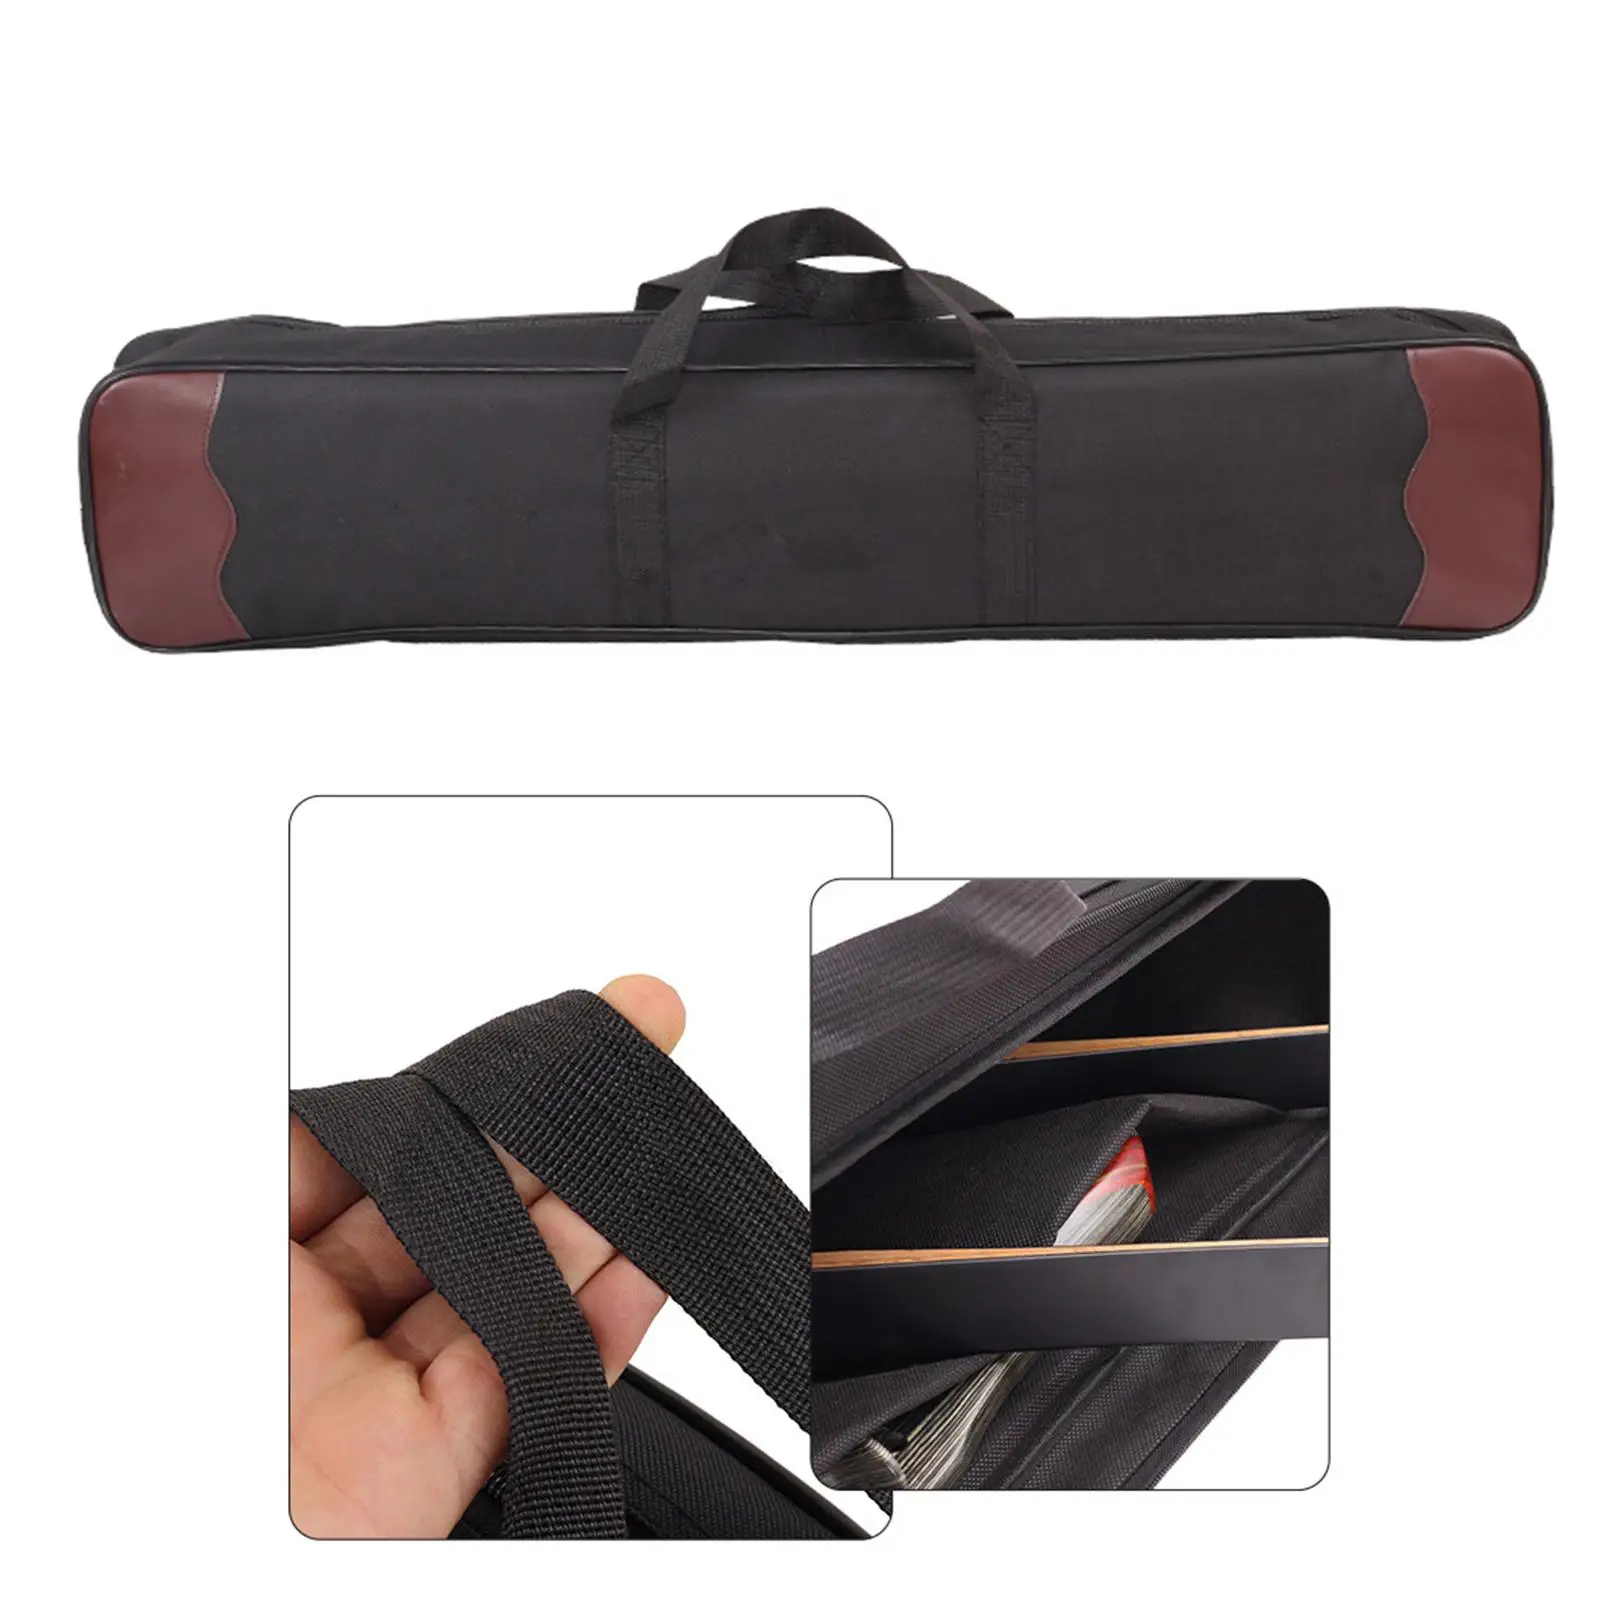 Recurve Bow Archery Bag Outdoor Portable Storage Case Durable Bow Quiver for Training